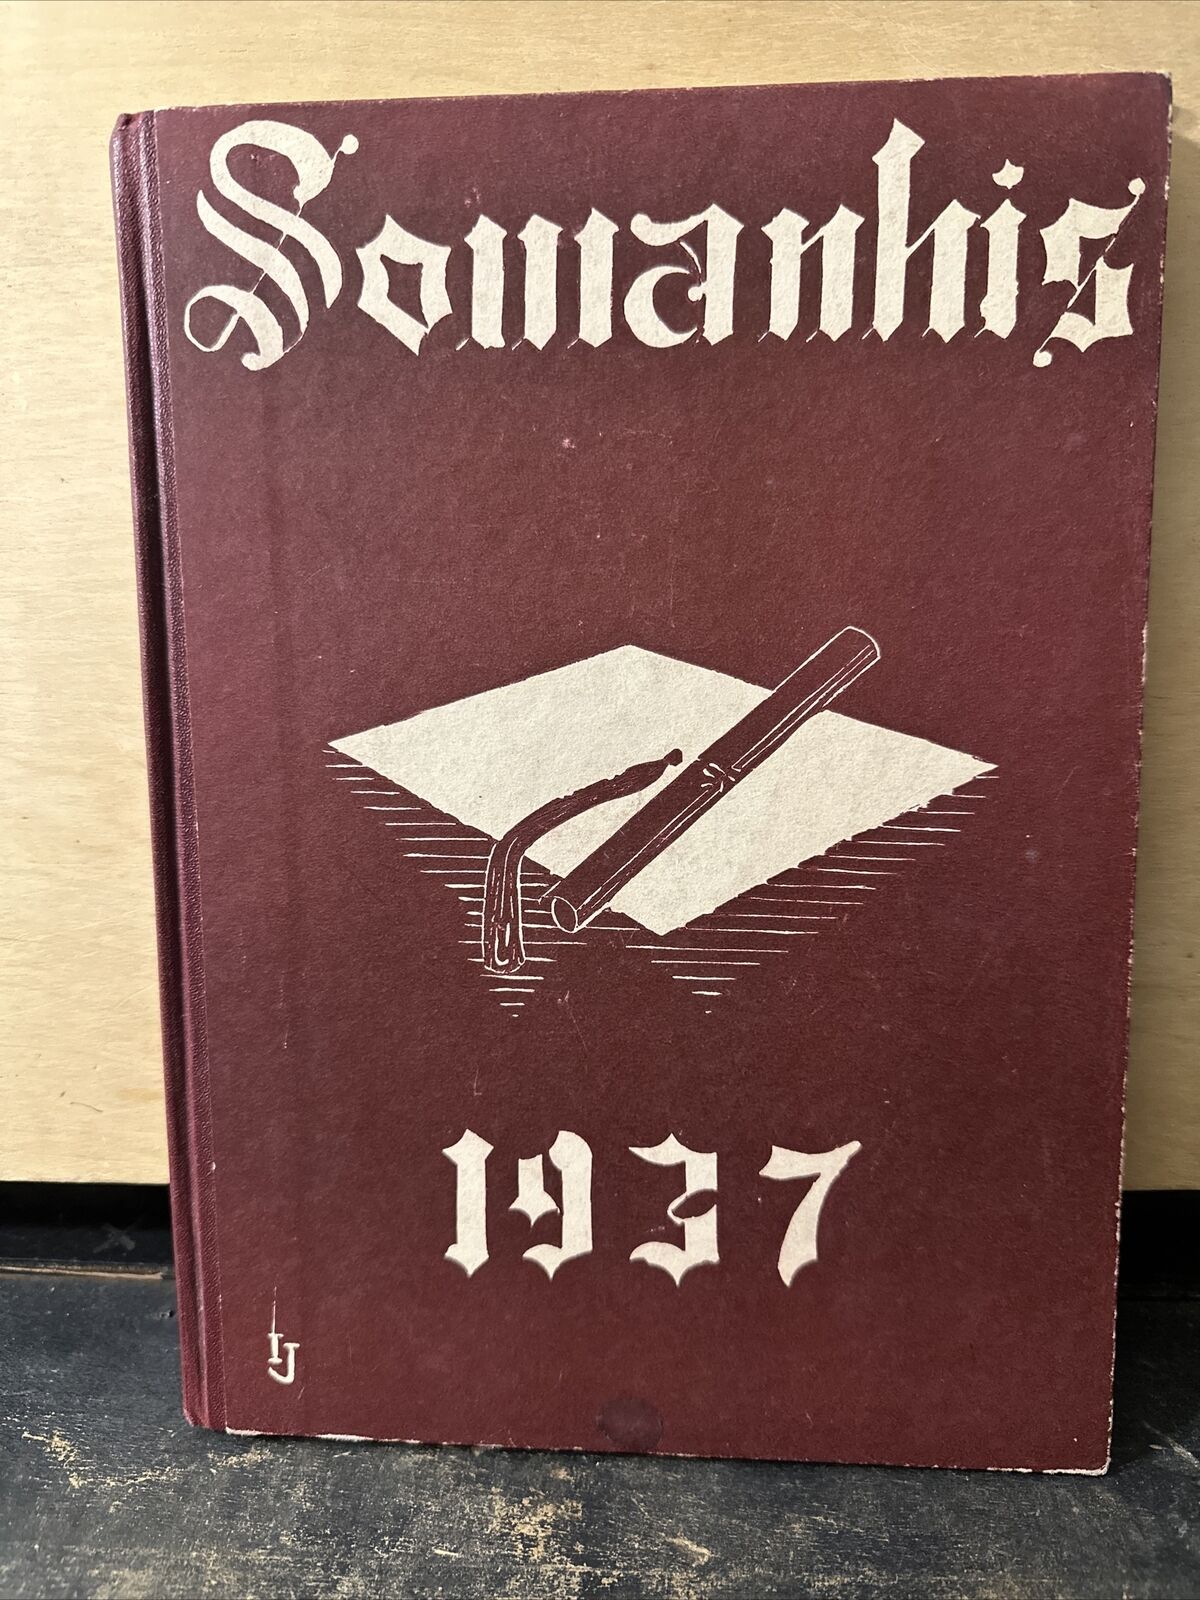 Manchester Connecticut high school ￼Yearbook 1937 “Somanhis”